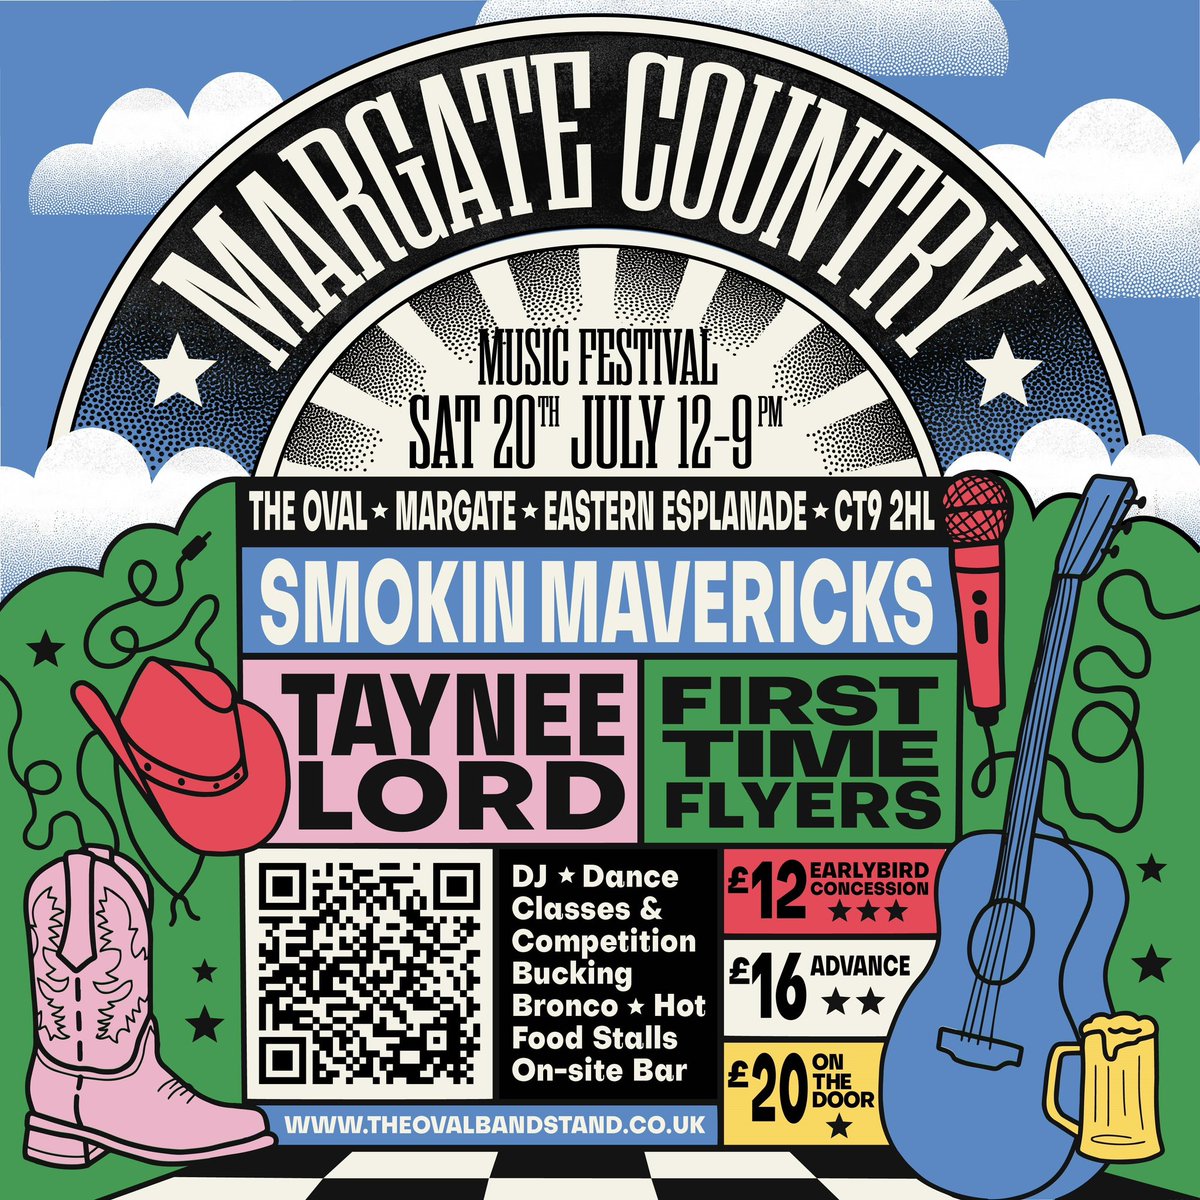 🎶 Yeehaw! Join us for Margate’s first Country Music Festival at The Oval on July 20th! 🤠 Dance to Smokin Mavericks, Taynee Lord & more from 12-9pm. . 🌅 Grab tickets now:eventbrite.co.uk/e/margate-coun… 🎟️ #MargateCountryFest #LiveMusic #FestivalVibes #margate